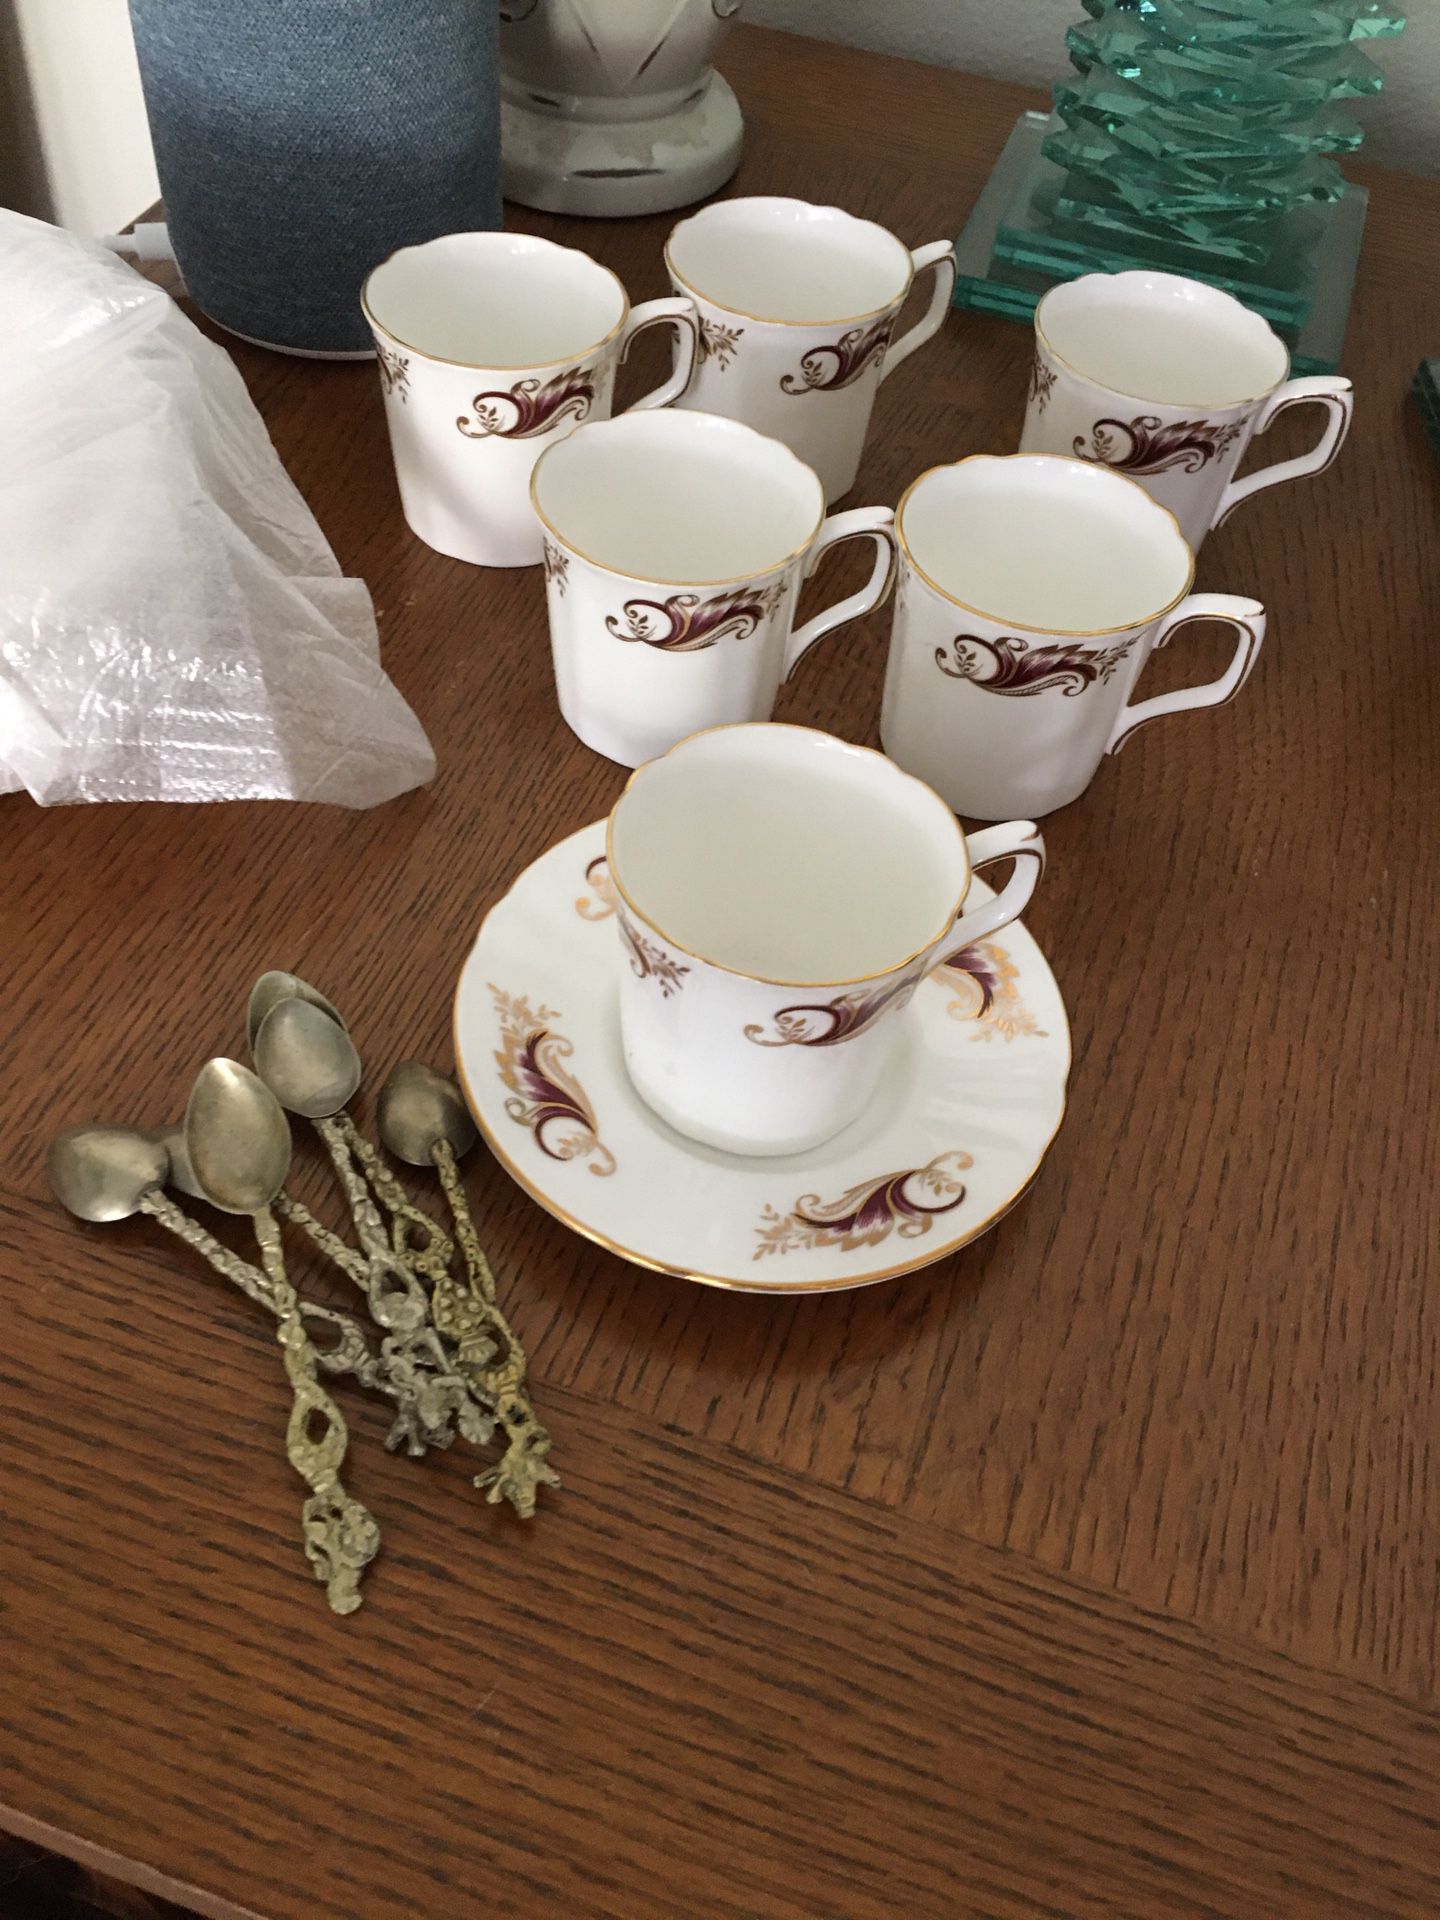 Demitess Cups And Saucers